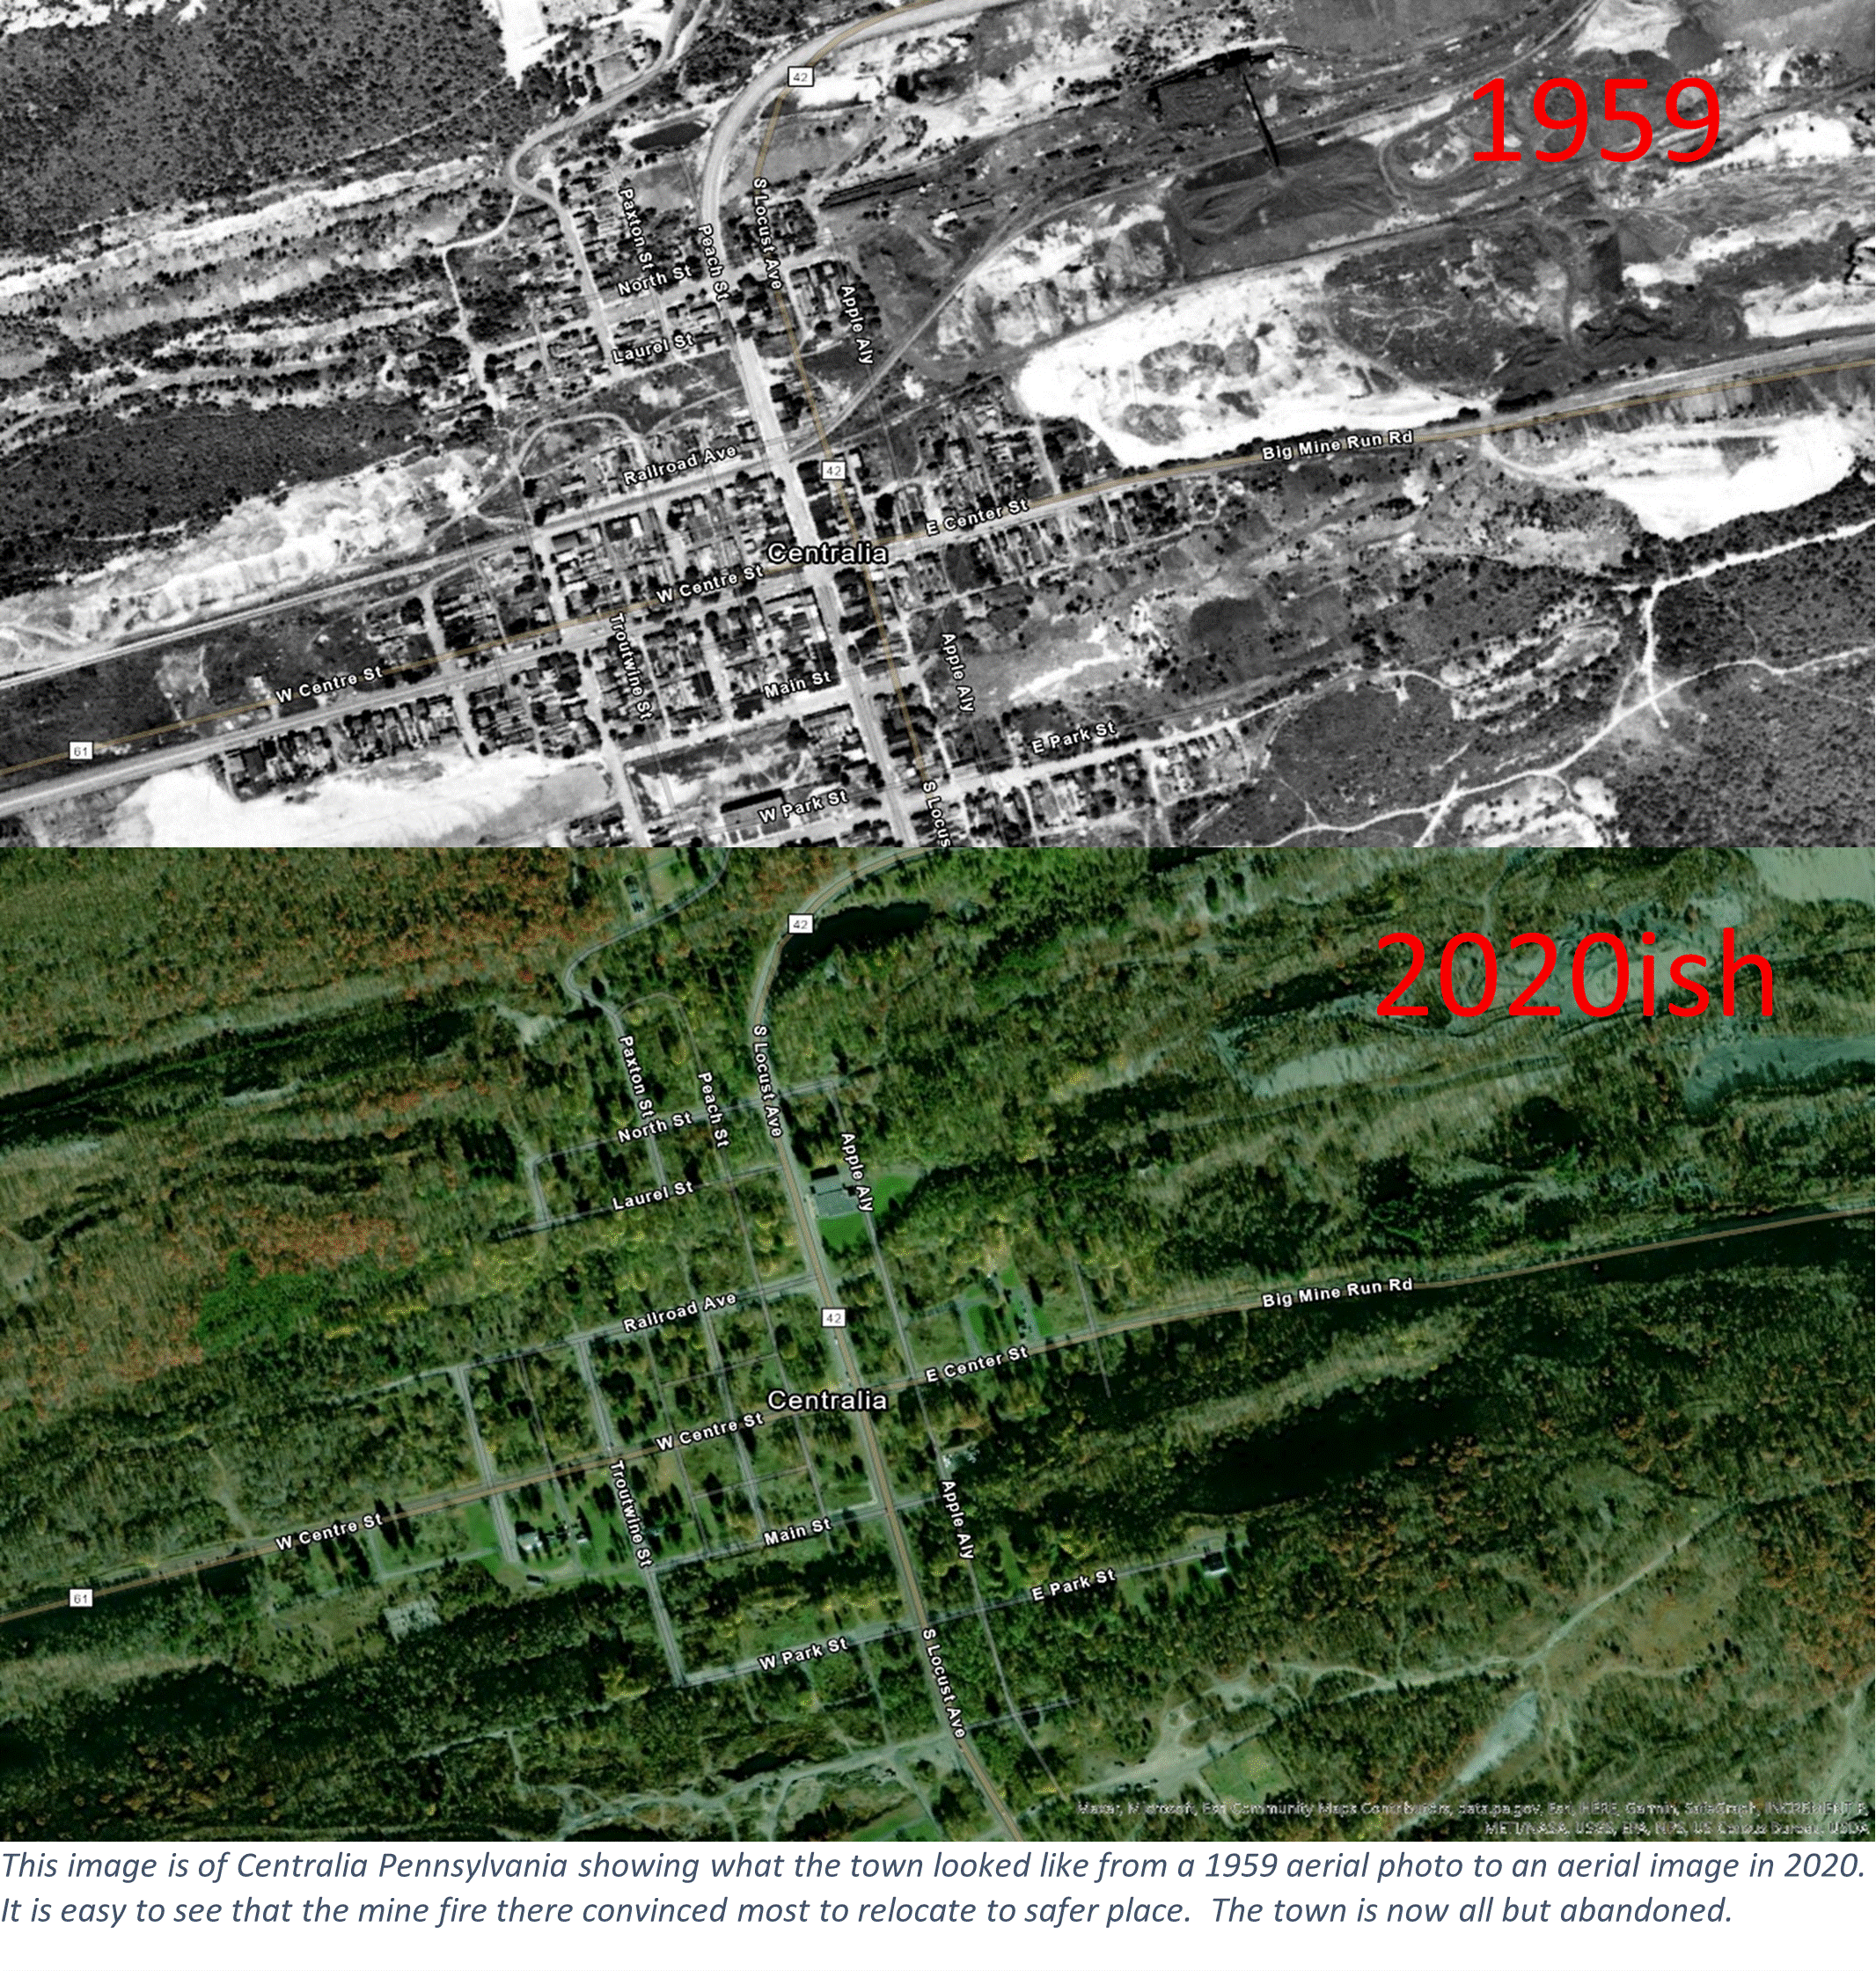 This image is of Centralia Pennsylvania showing what the town looked like from a 1959 aerial photo to an aerial image in 2020.  It is easy to see that the mine fire there convinced most to relocate to safer place.  The town is now all but abandoned.